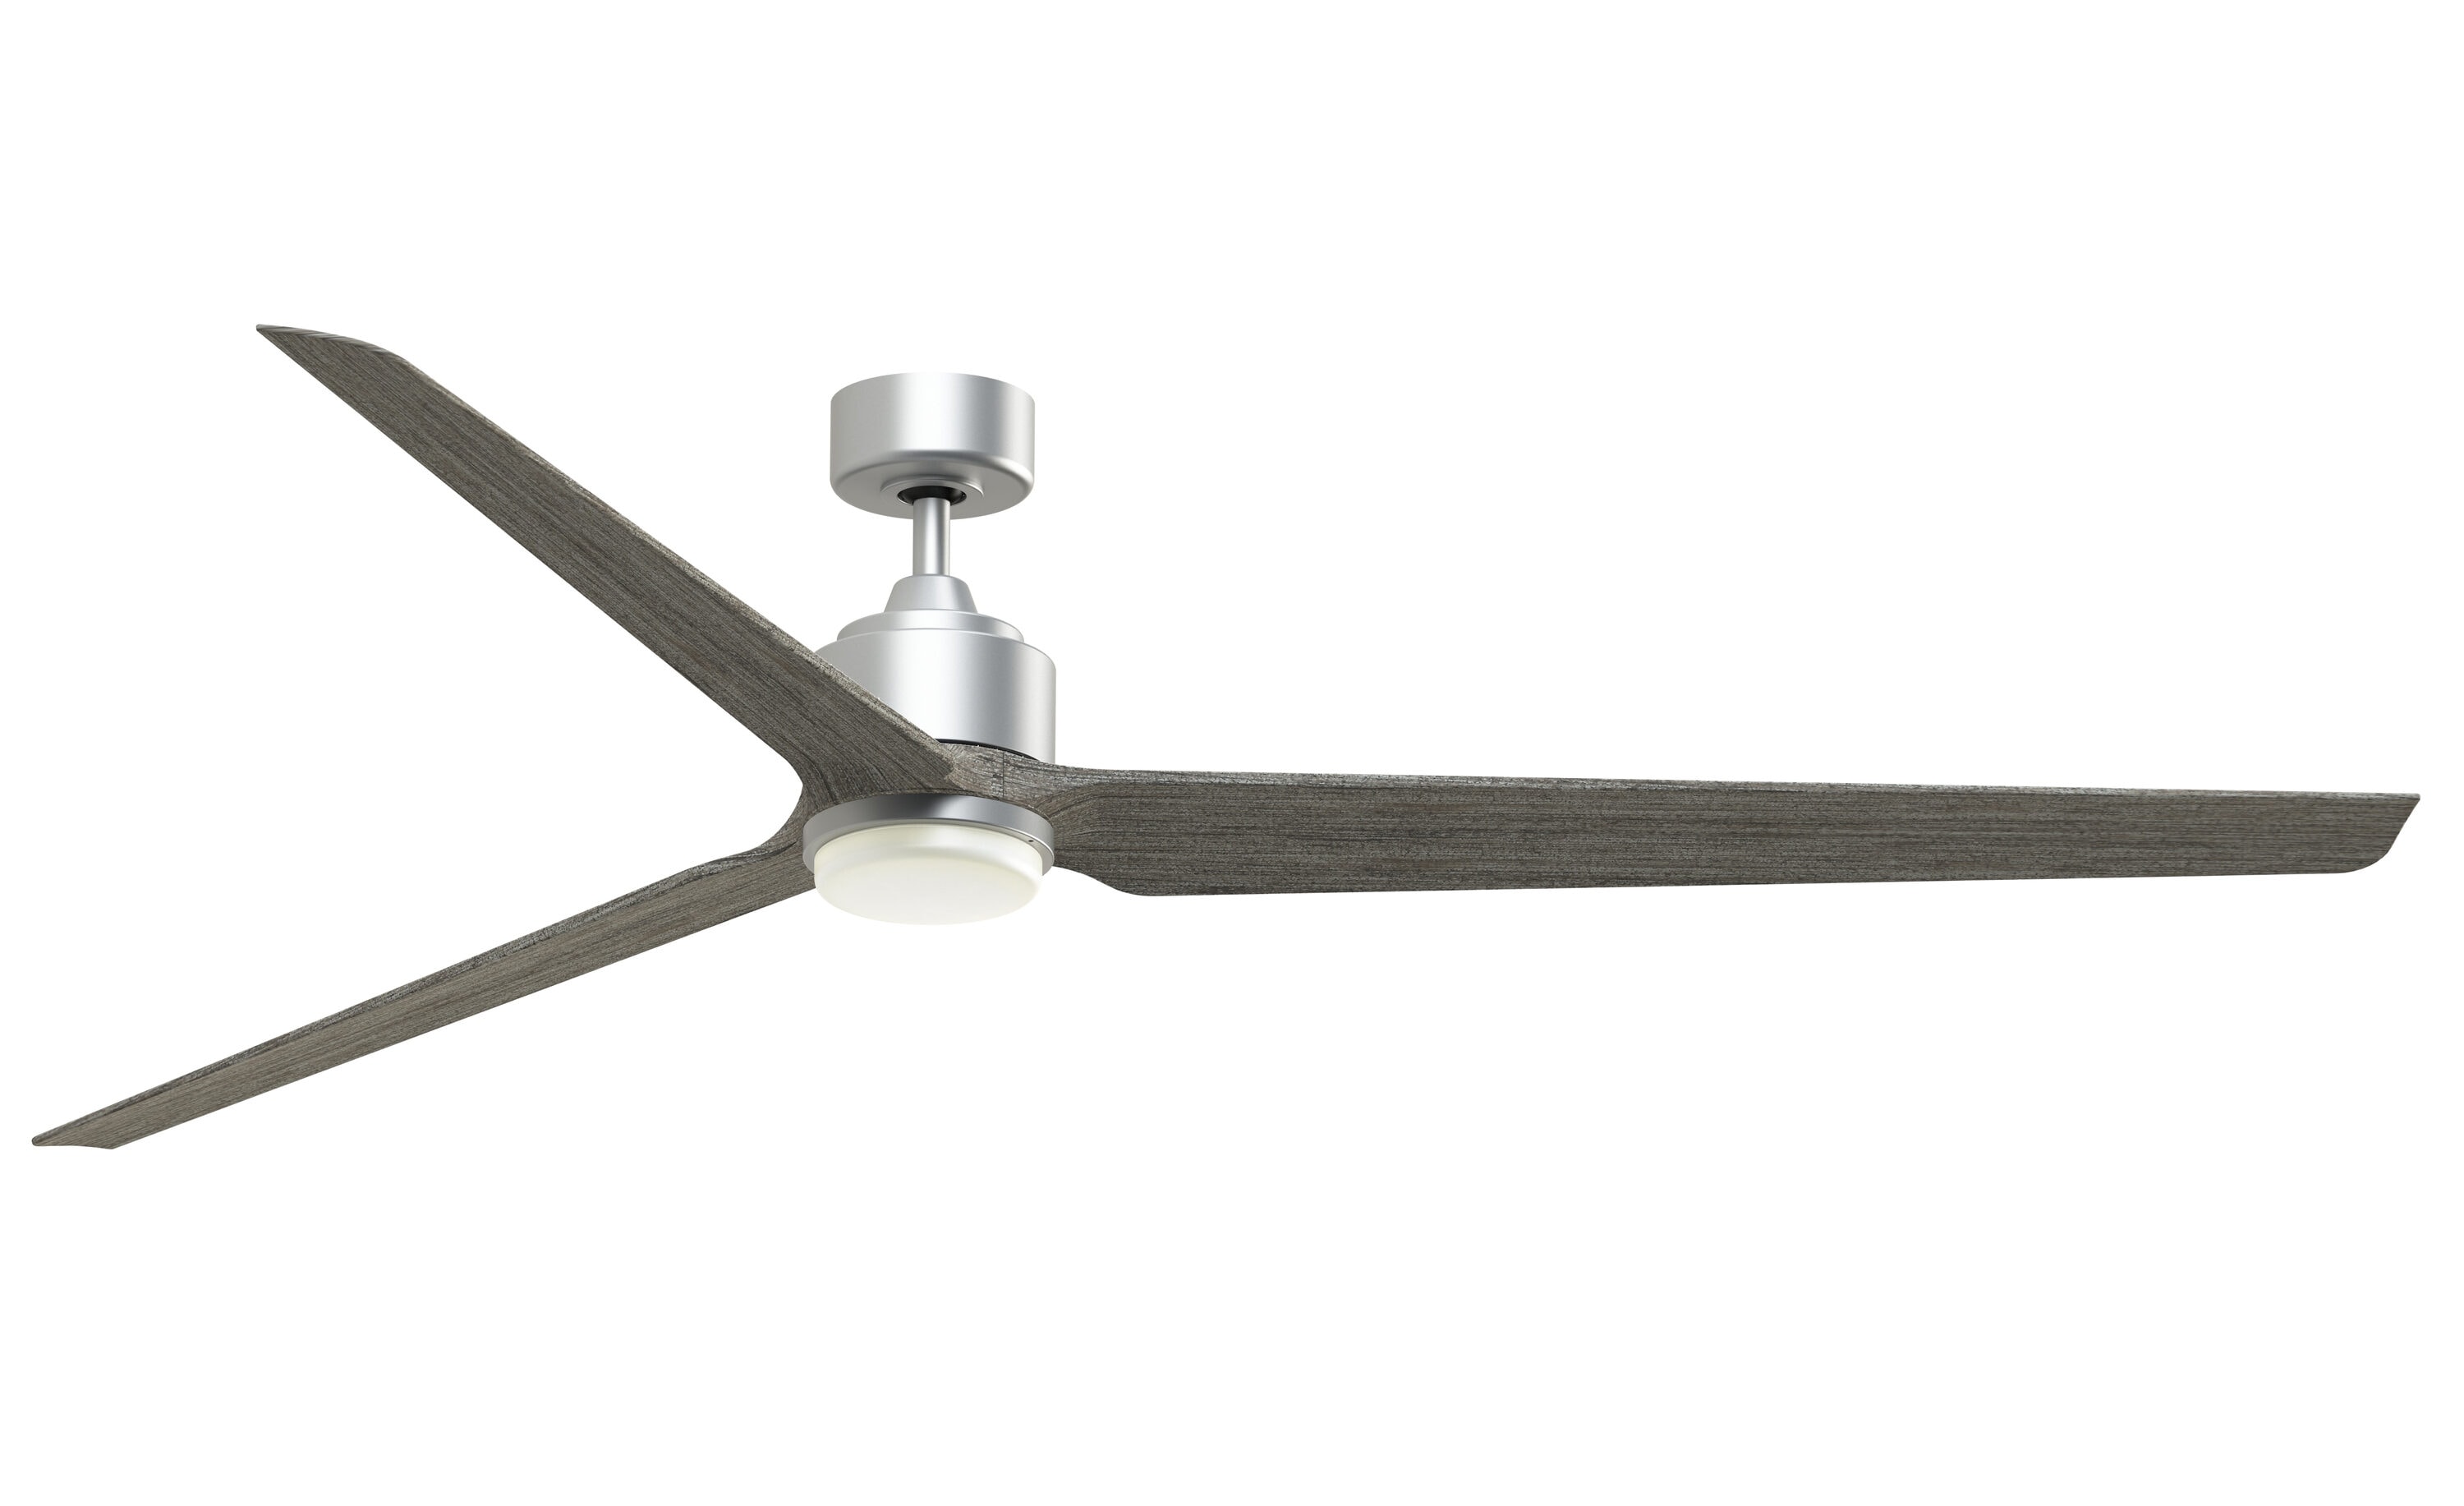 TriAire Custom 84-in Silver Color-changing LED Indoor/Outdoor Smart Propeller Ceiling Fan with Light Remote (3-Blade) | - Fanimation FPD8515SLW-84WEW-LK